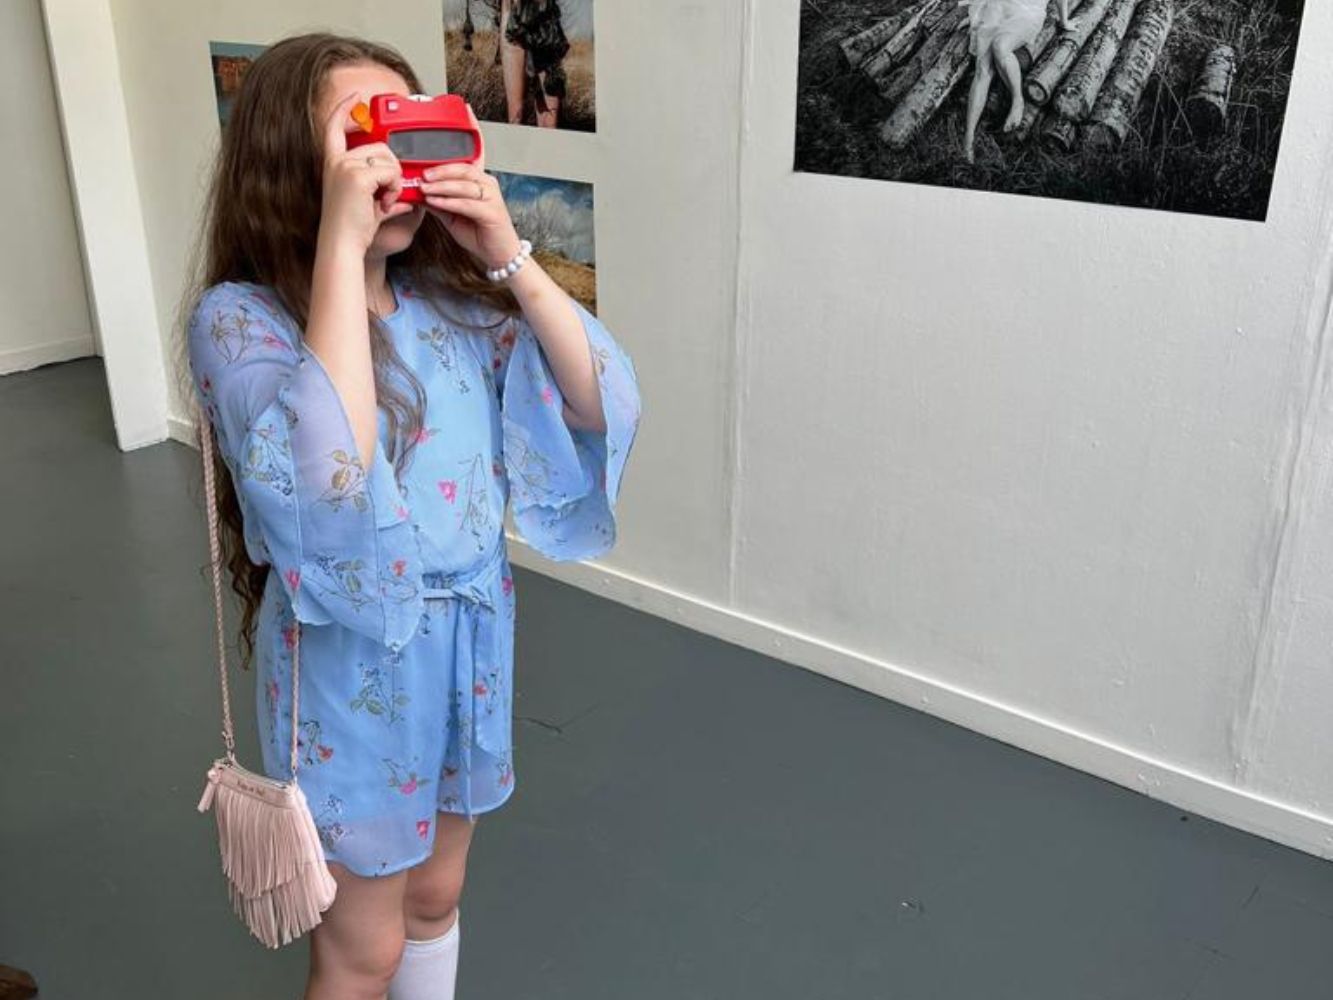 Kitty Donovan interacts with objects in the gallery